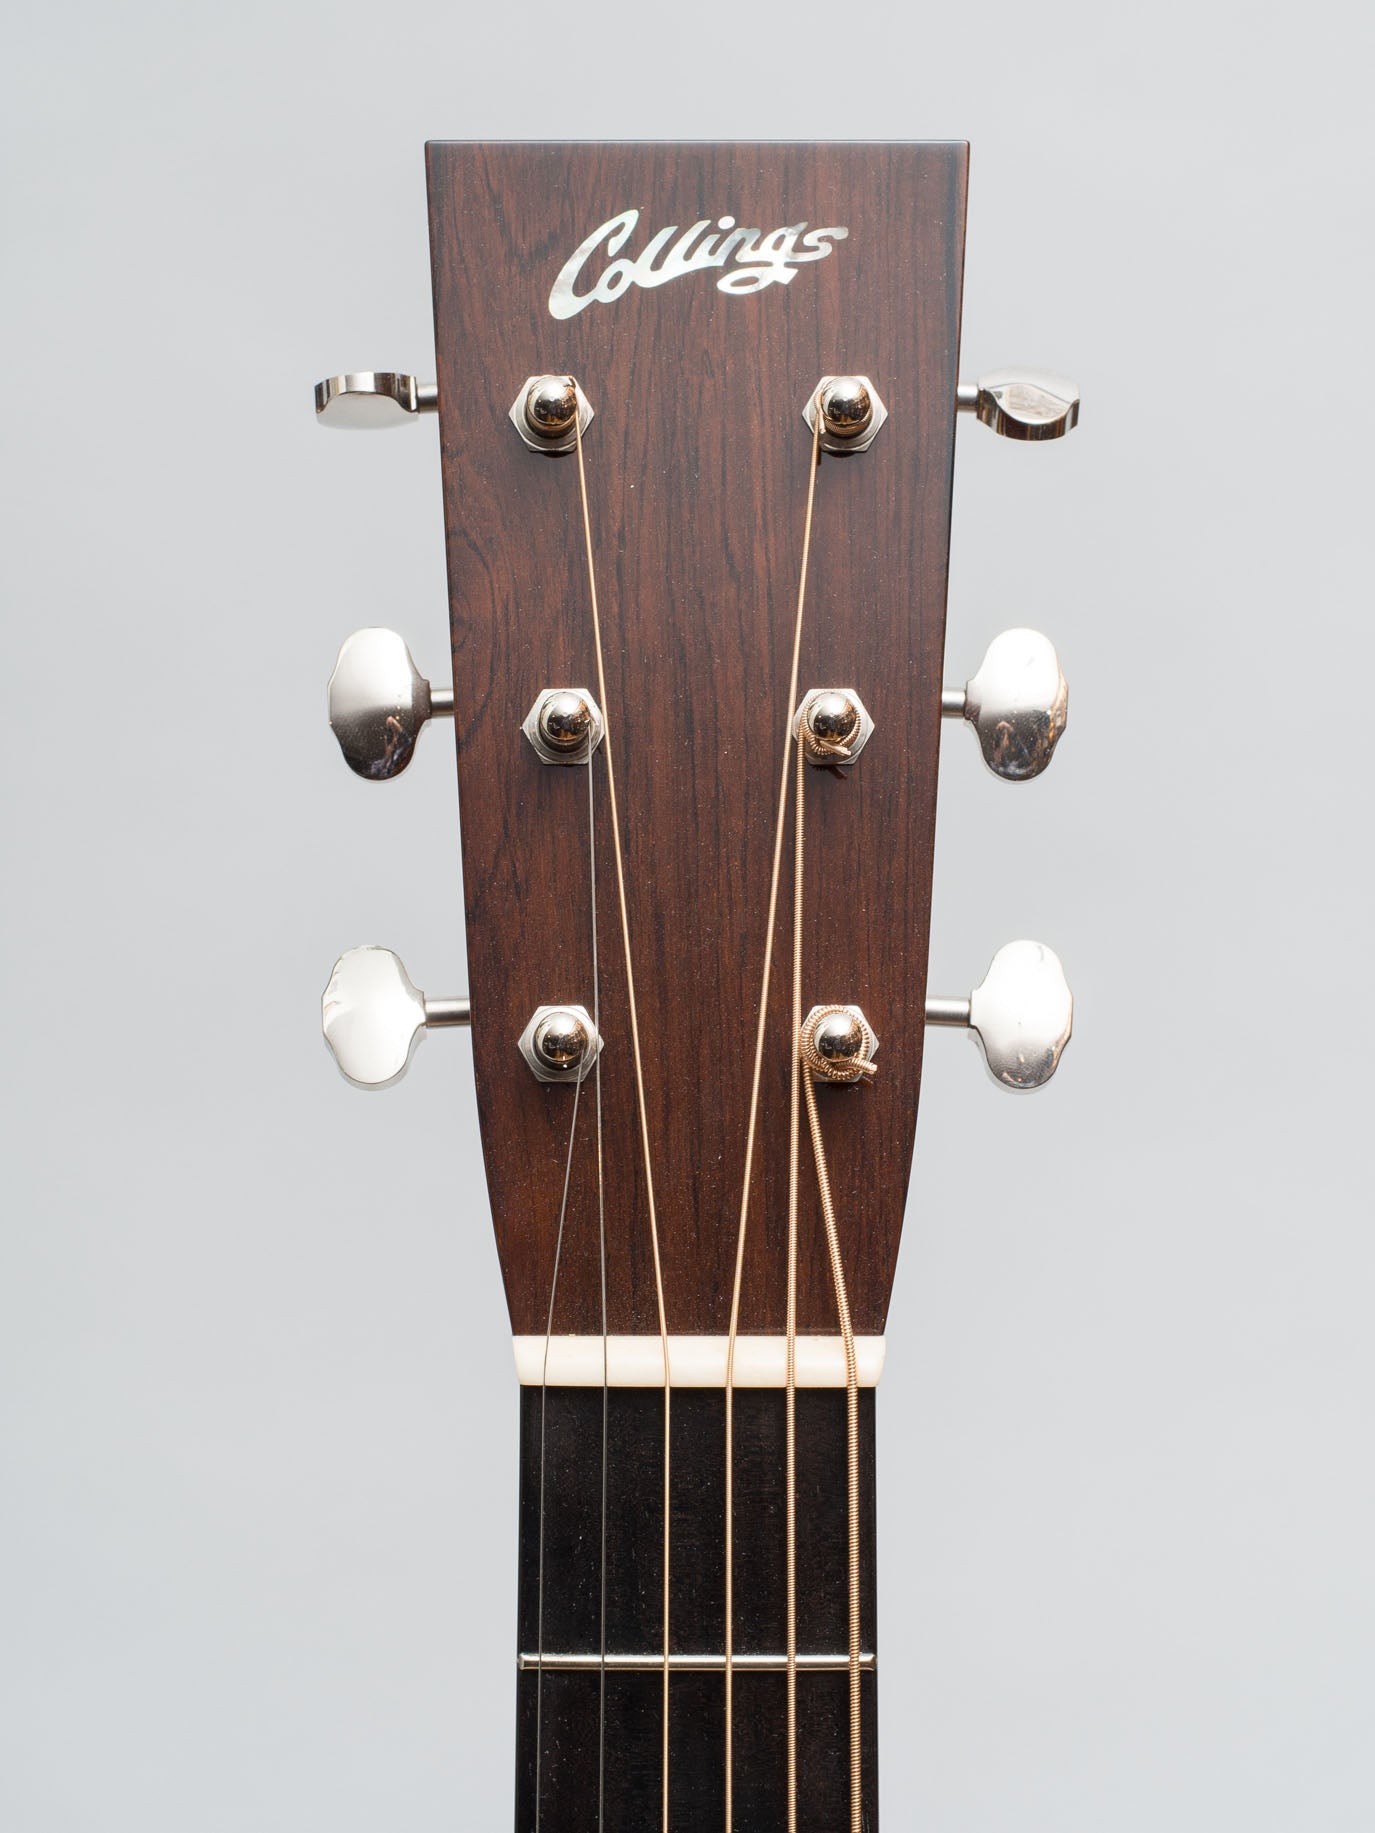 2010 Collings 02H Lefty